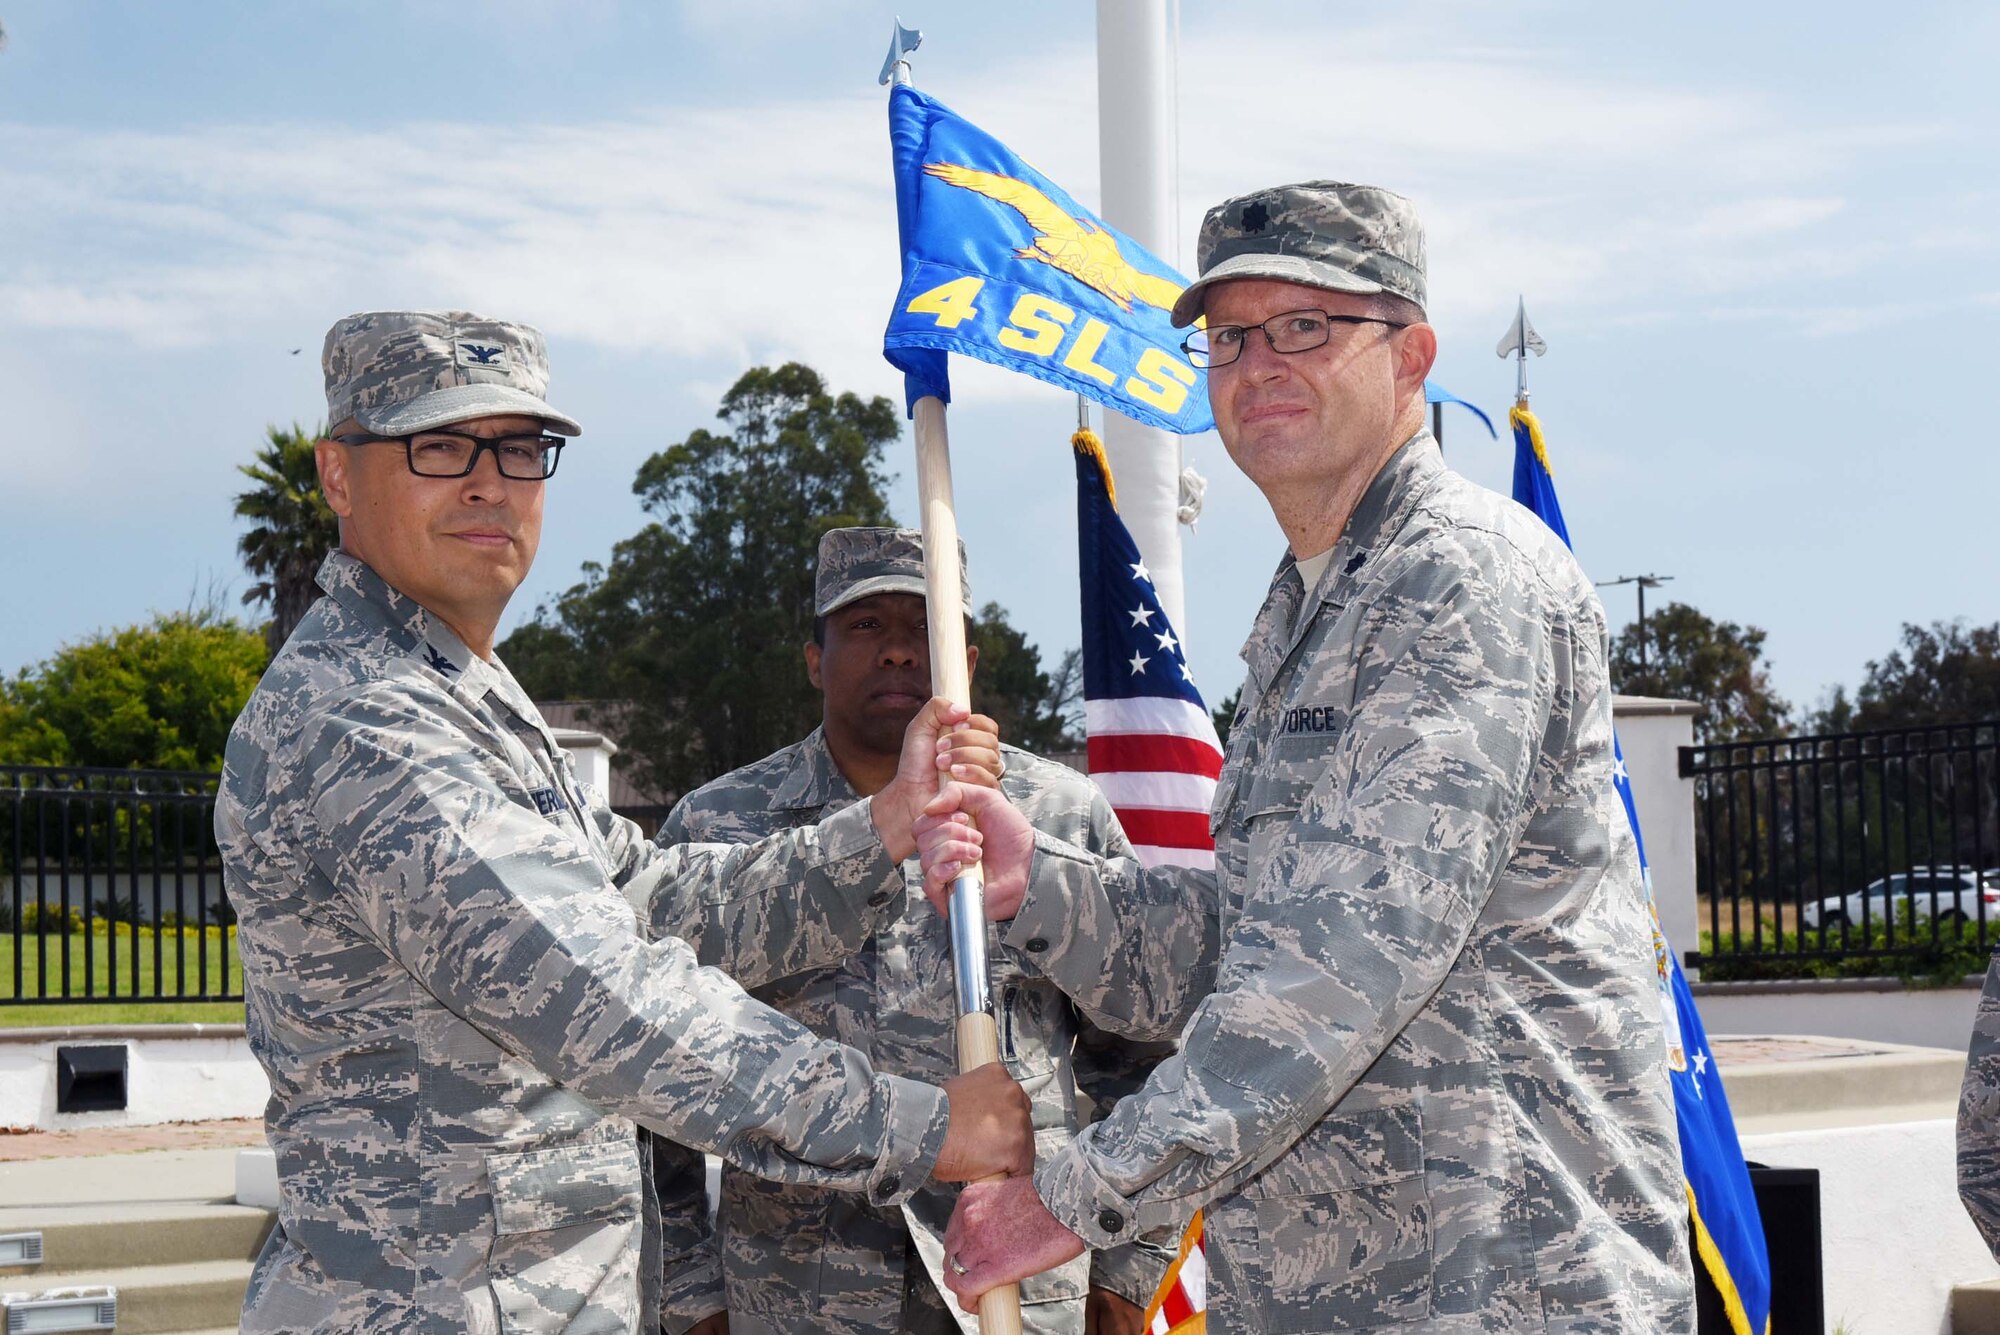 Col. Curtis Hernandez, 30th Operations Group commander, hands the guide on to Lt. Col. Kenneth Decker, 4th Space Launch Squadron commander, during the 30th Launch Group deactivation ceremony on July 20, 2018, at Vandenberg Air Force Base, Calif. The 30th Space Wing inactivated the 30th LCG, merging their range responsibilities and personnel with the 30th OG. (U.S. Air Force photo by Tech. Sgt. Jim Araos/Released)